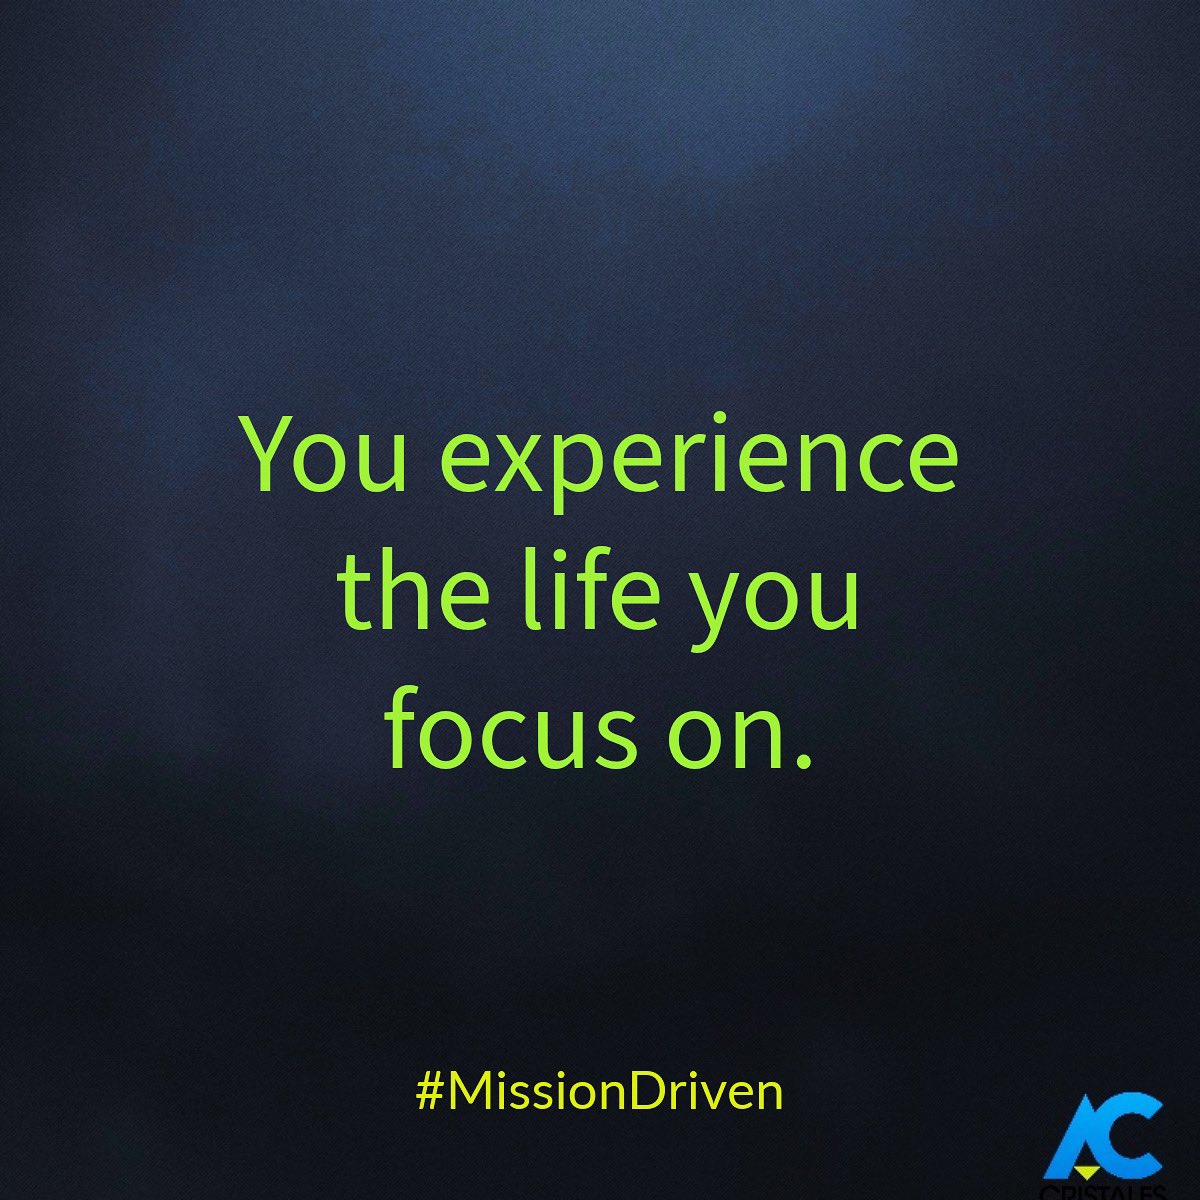 Choose what you focus on carefully. What you focus on, you magnify. 

#MissionDriven #Focus